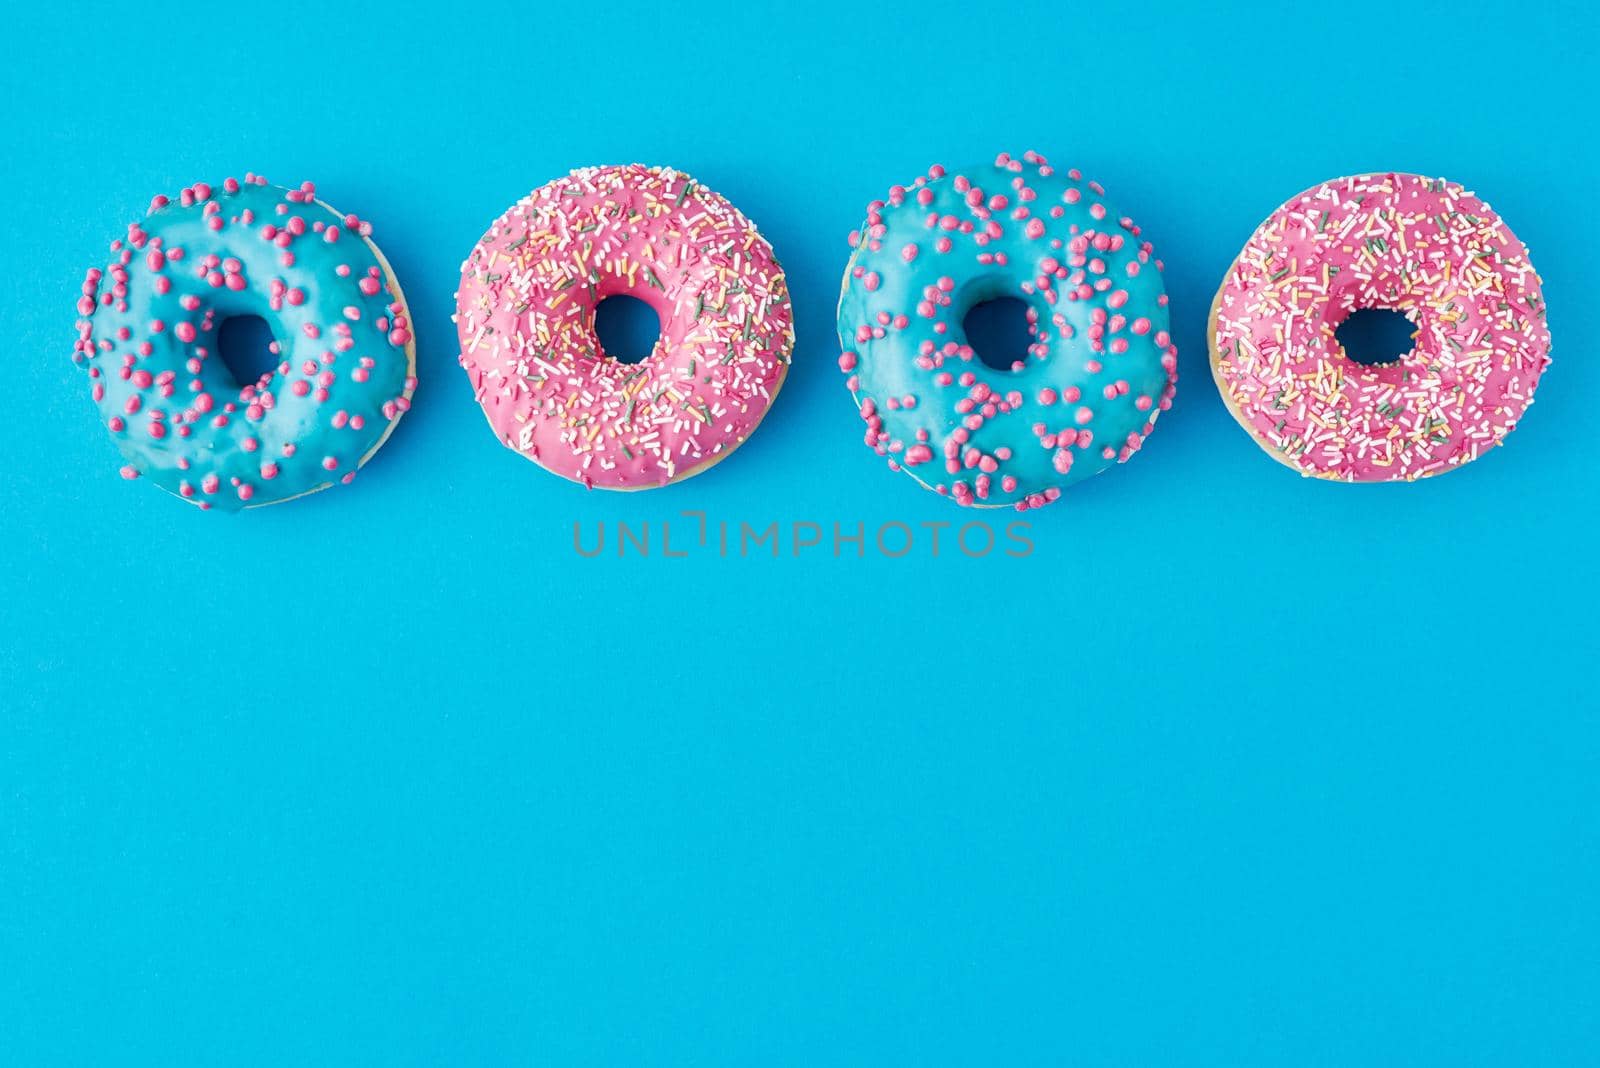 Different types of colorful donats decorated sprinkles and icing on blue background